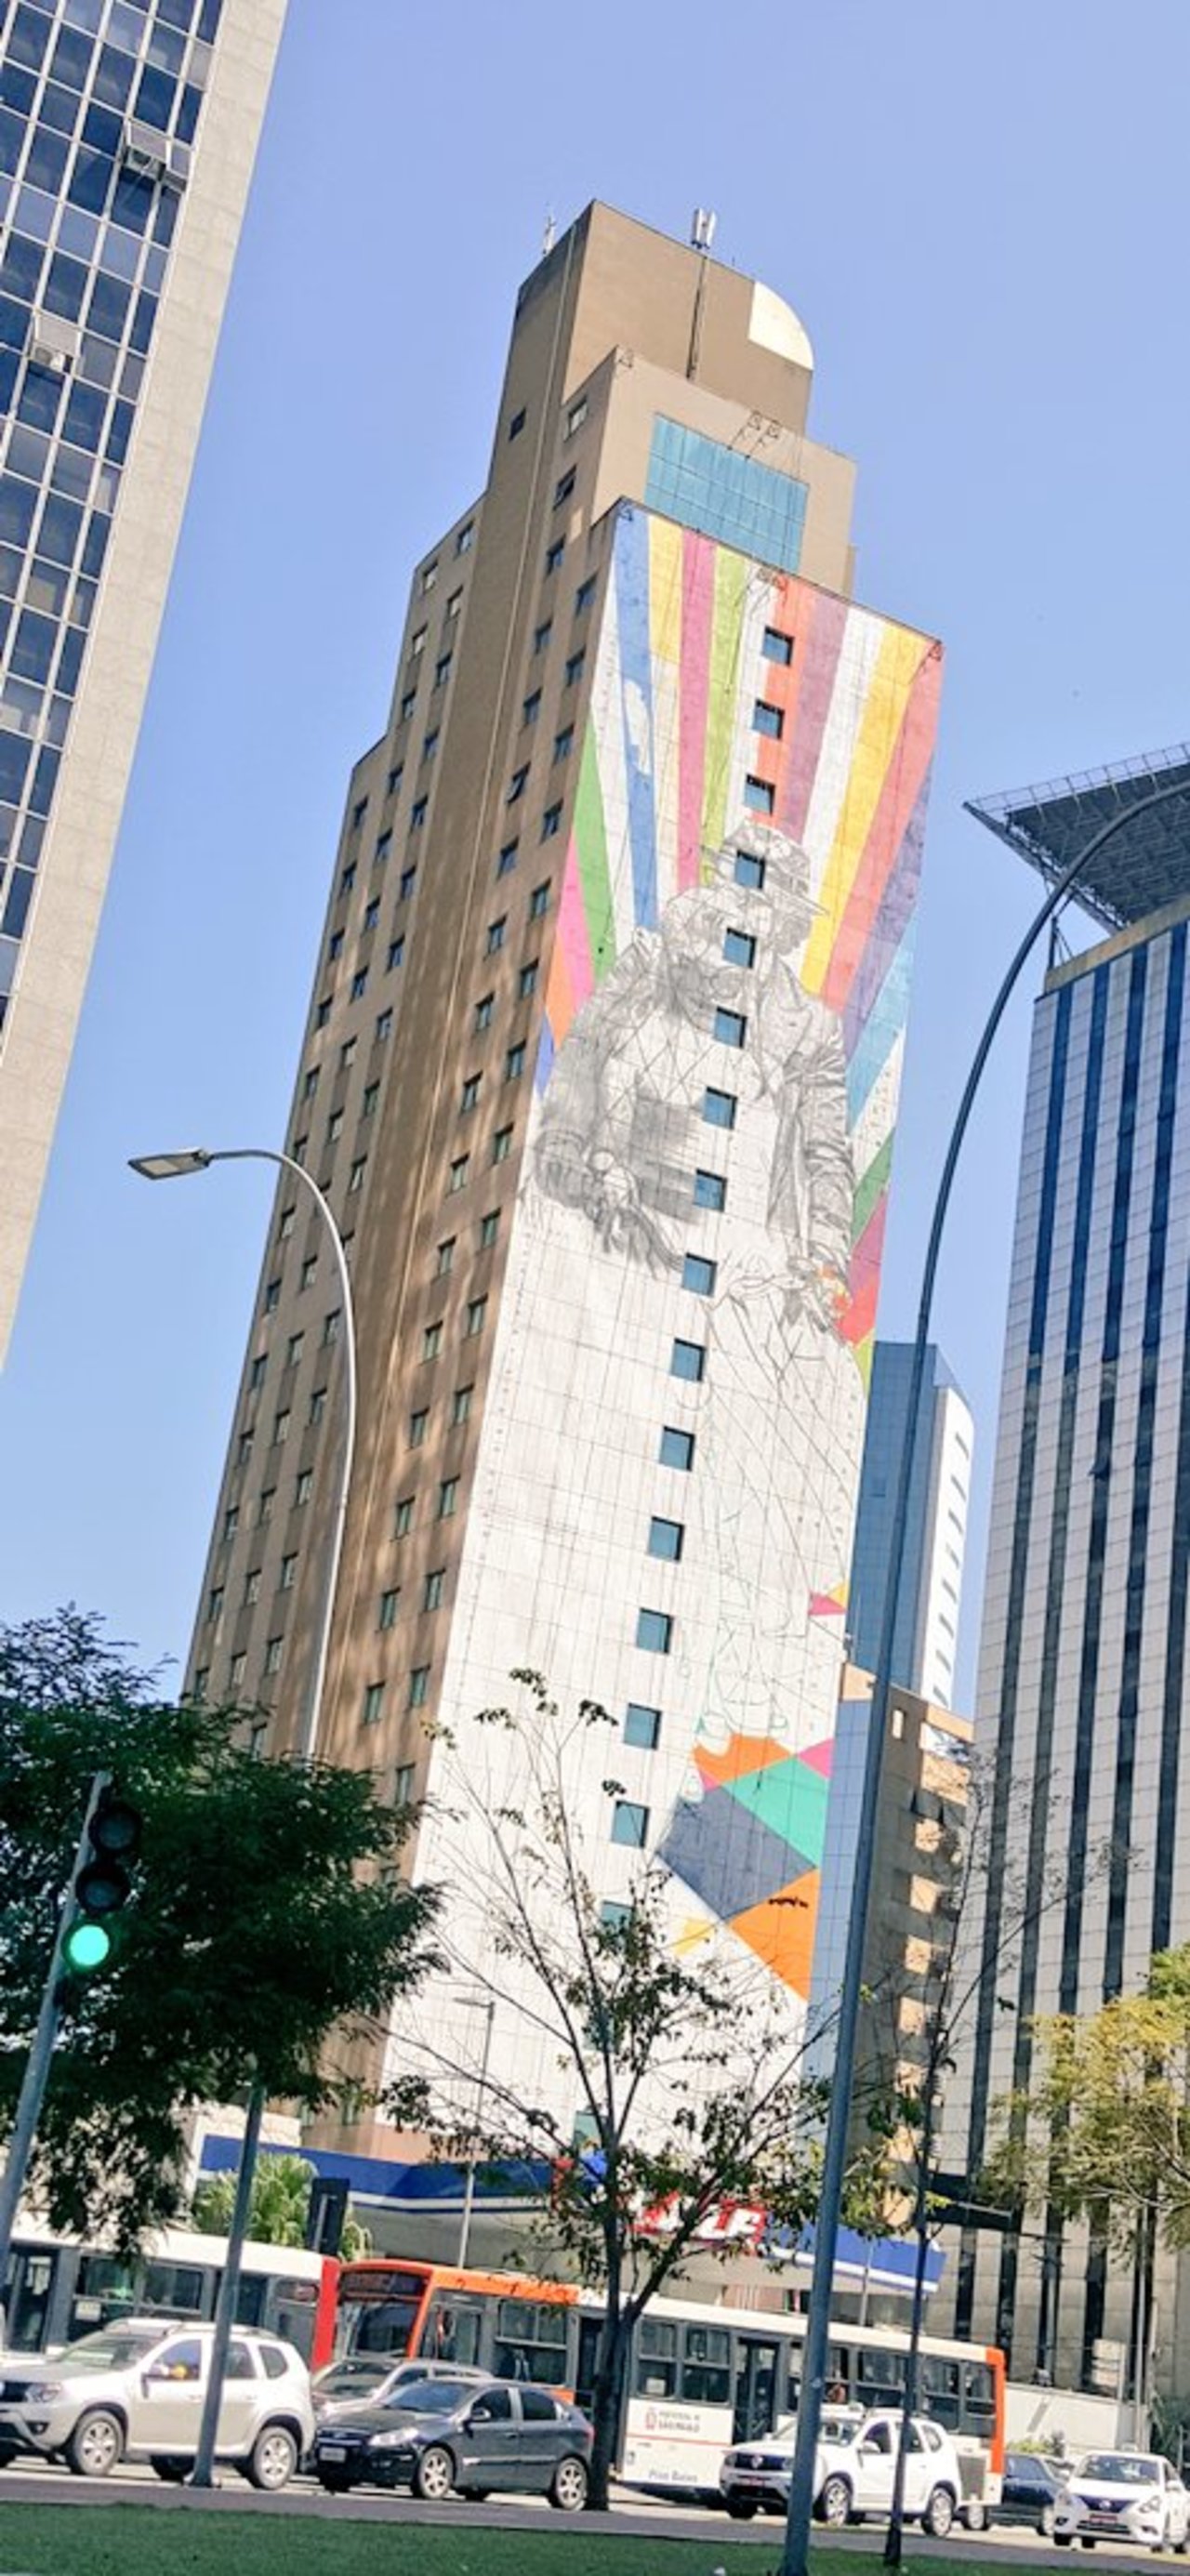 Look at this piece of #StreetArt they are working on right now in #SaoPaulo. #LuxuryTravel #StarAllianceRTW #Brazil https://t.co/atagTtdy8T